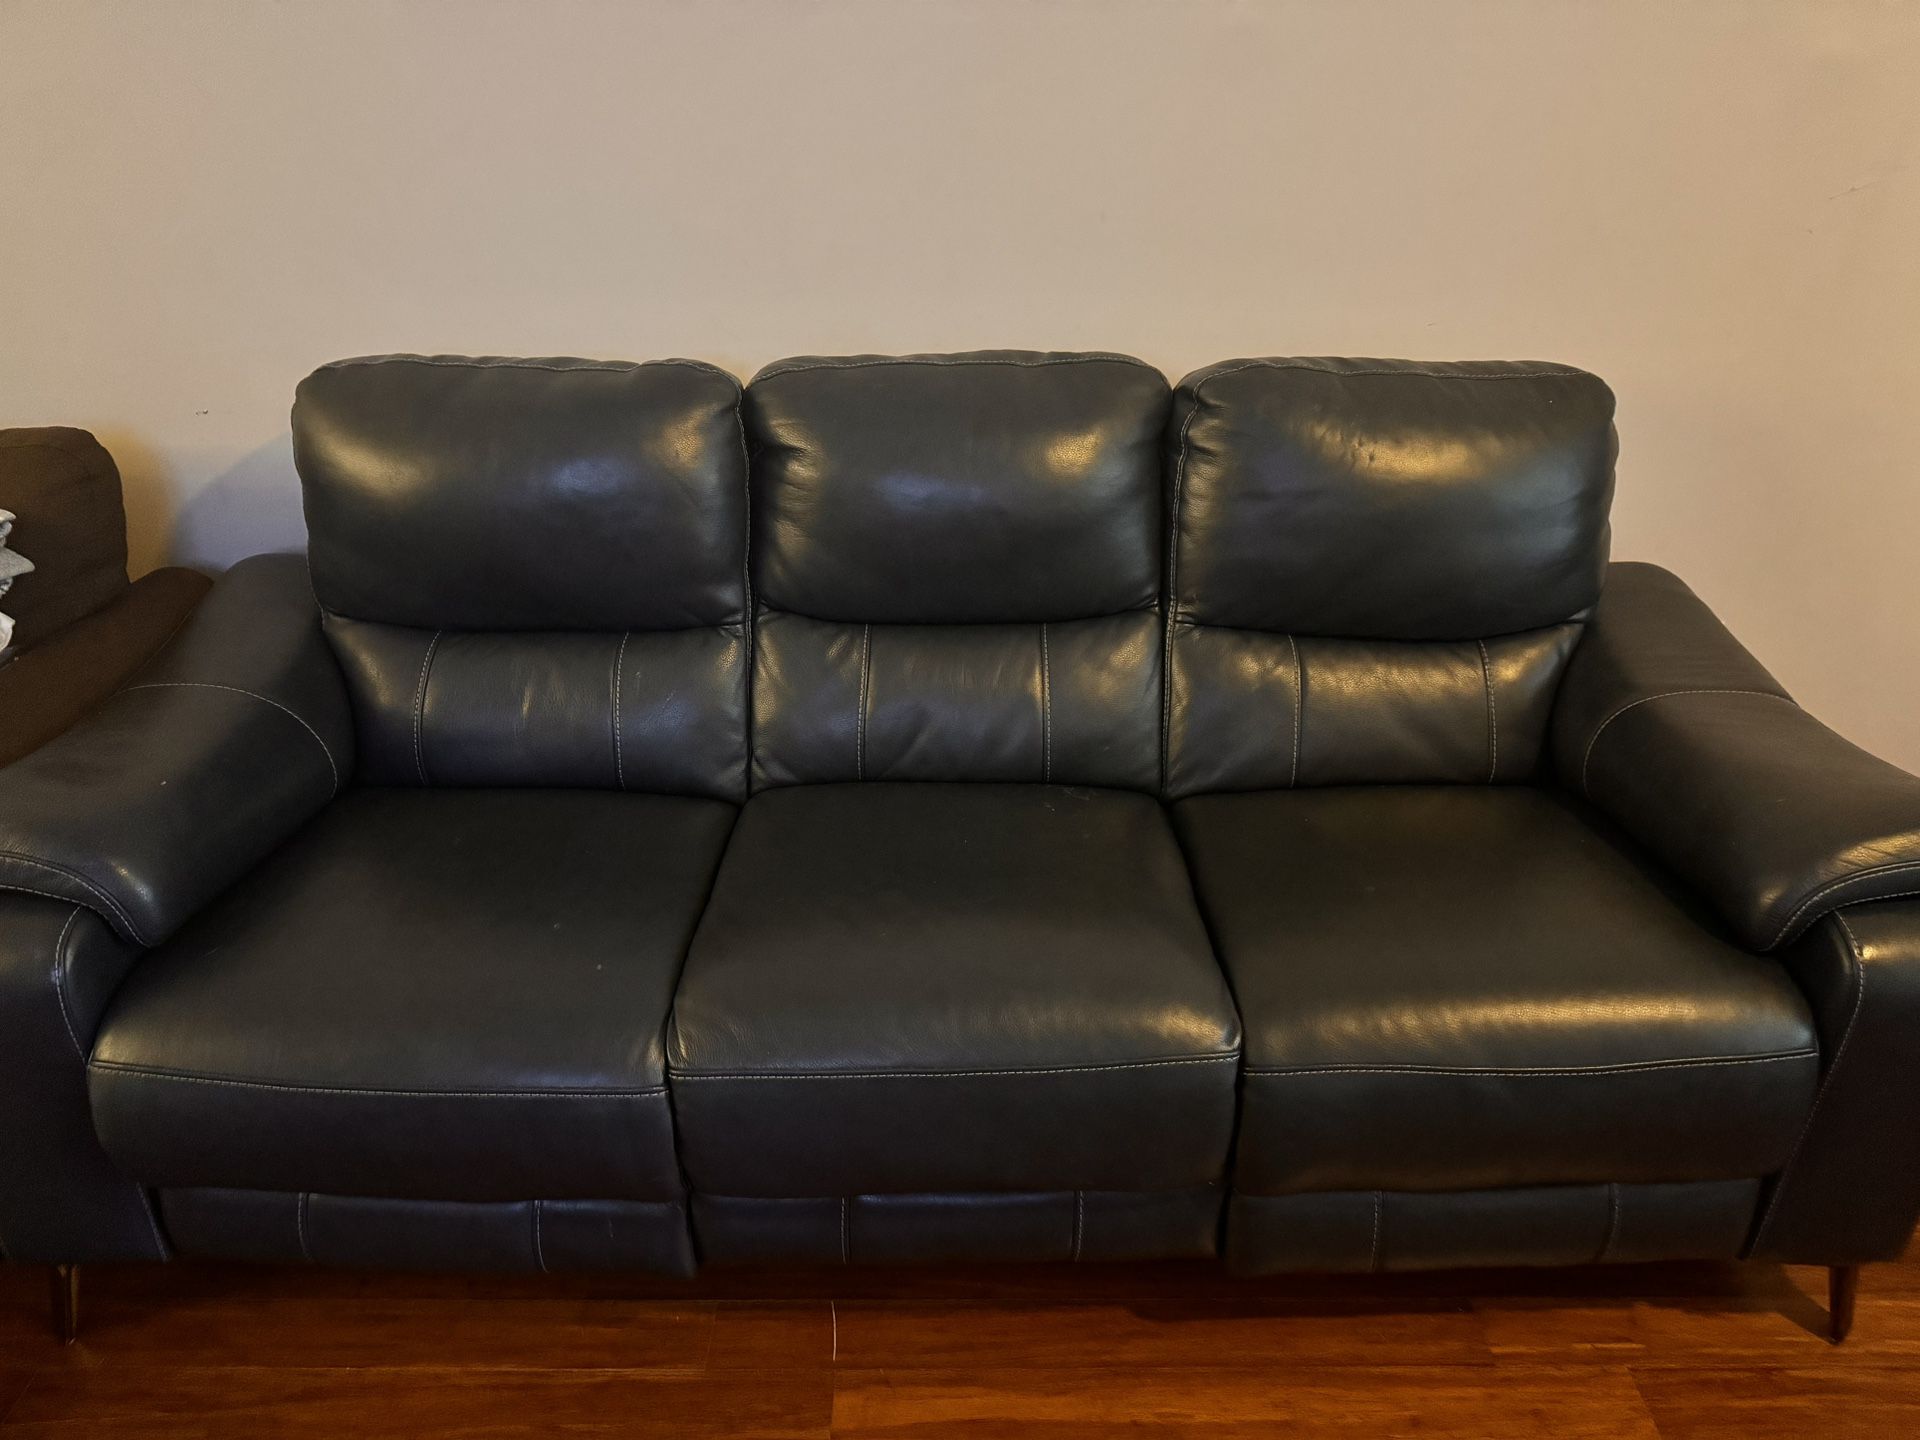 $275 Leather Electric Recliner Couch